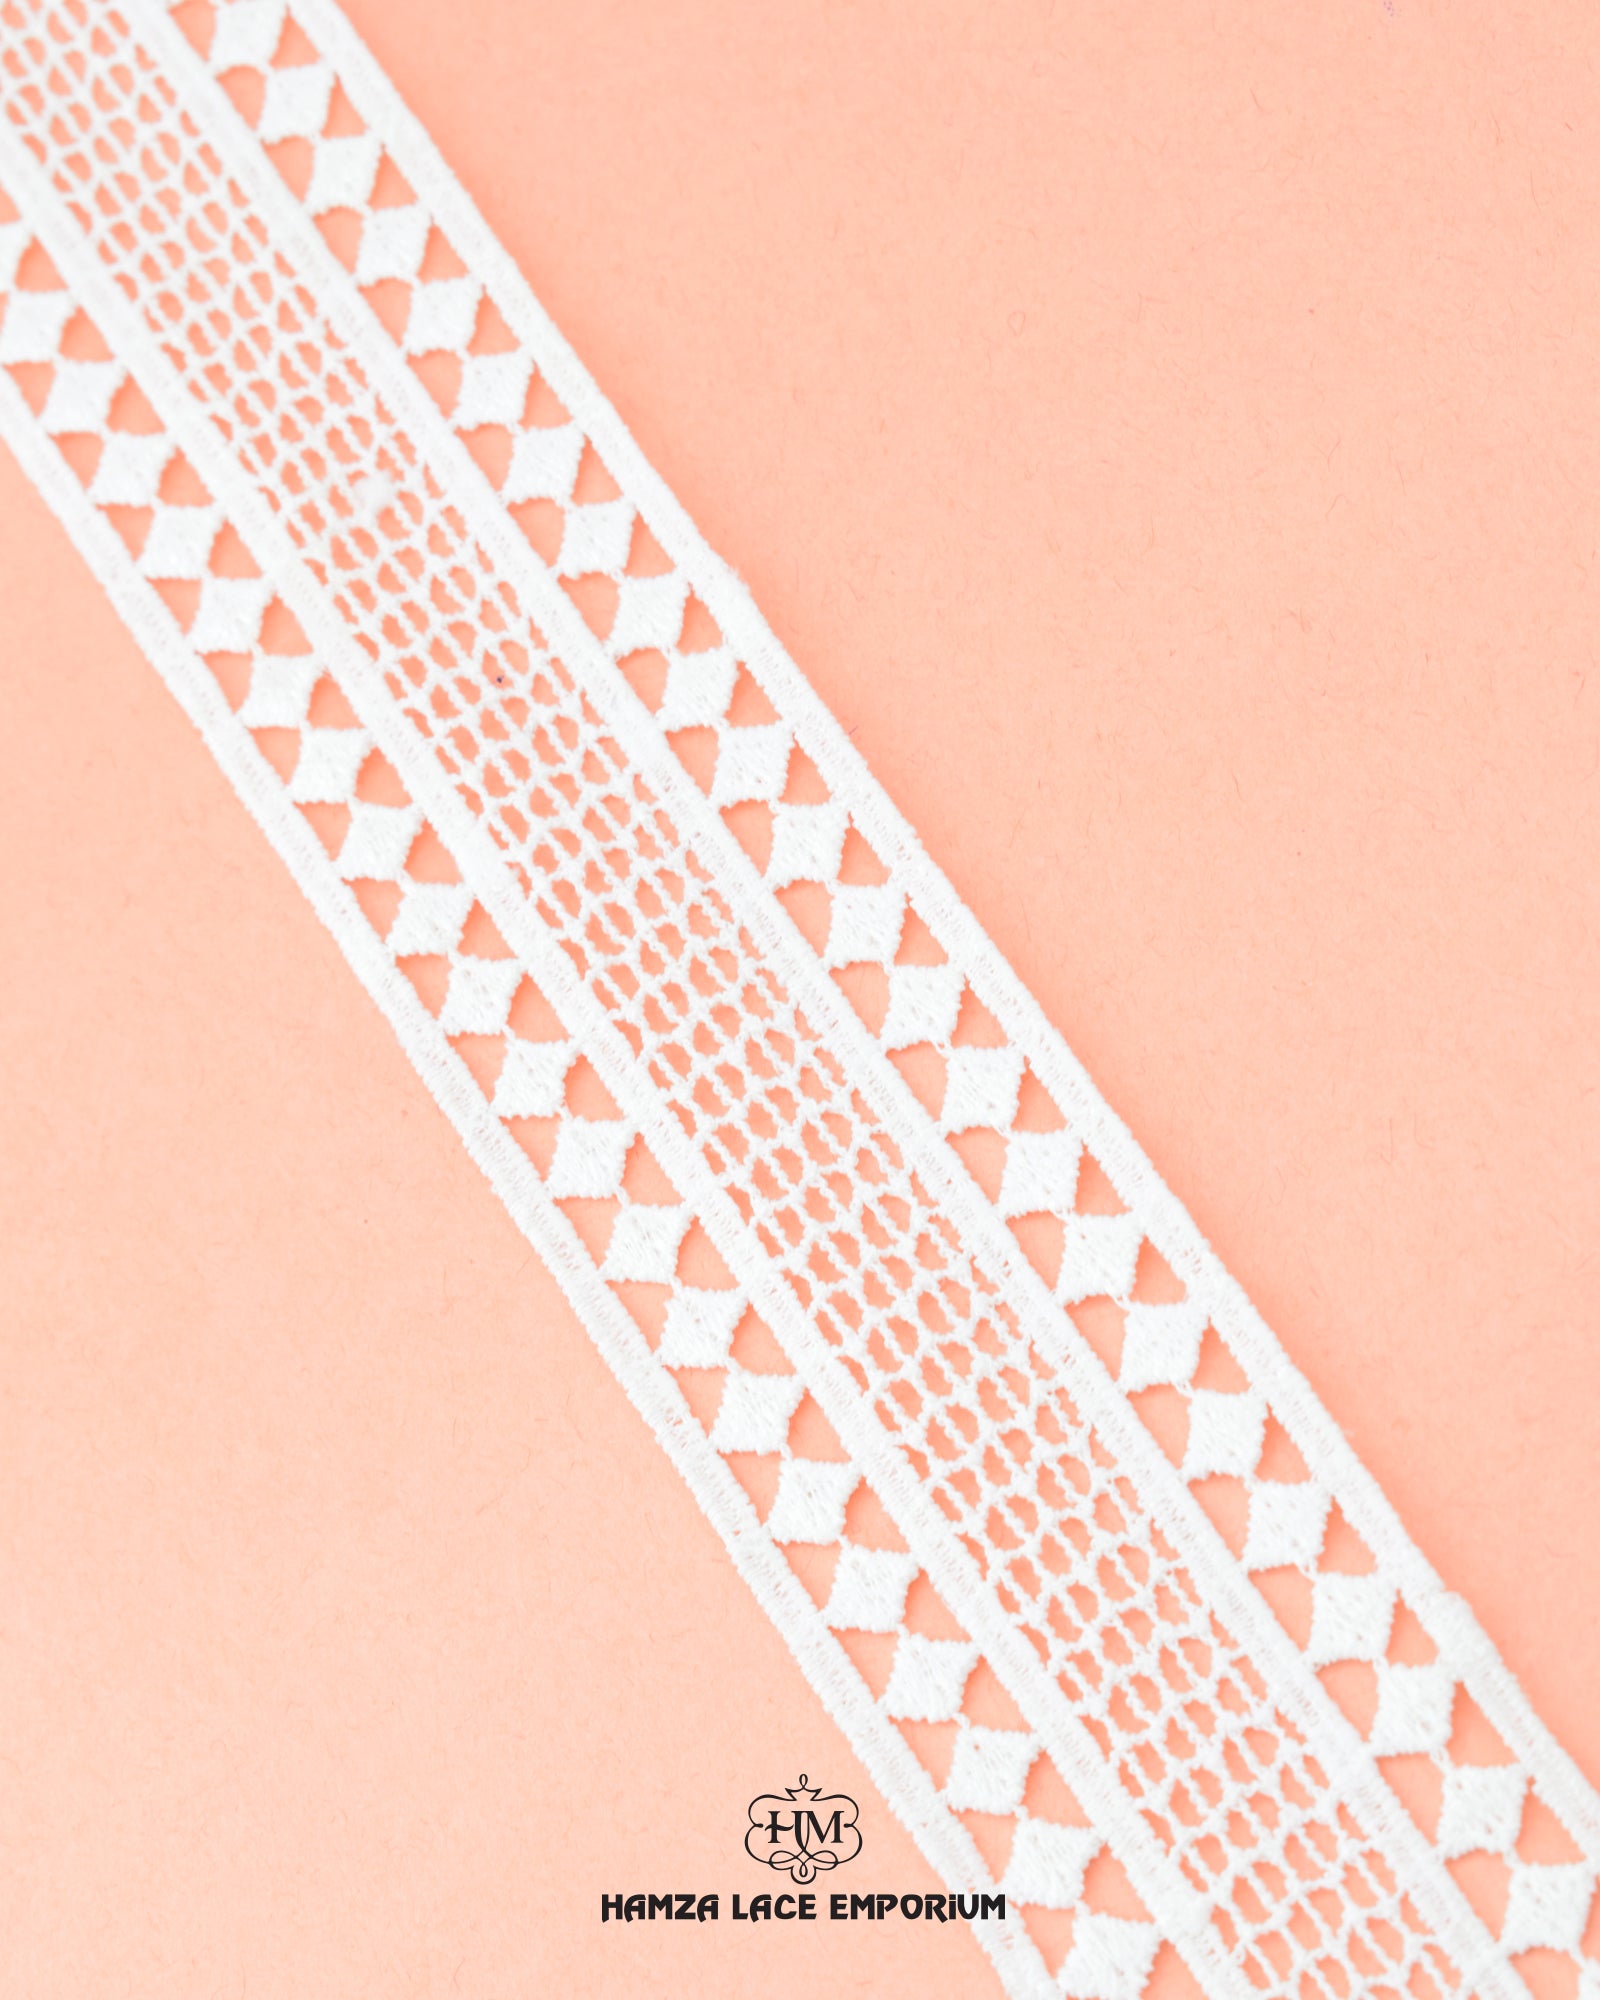 'Center Filling Lace 23202' with the brand name 'Hamza Lace' at the bottom